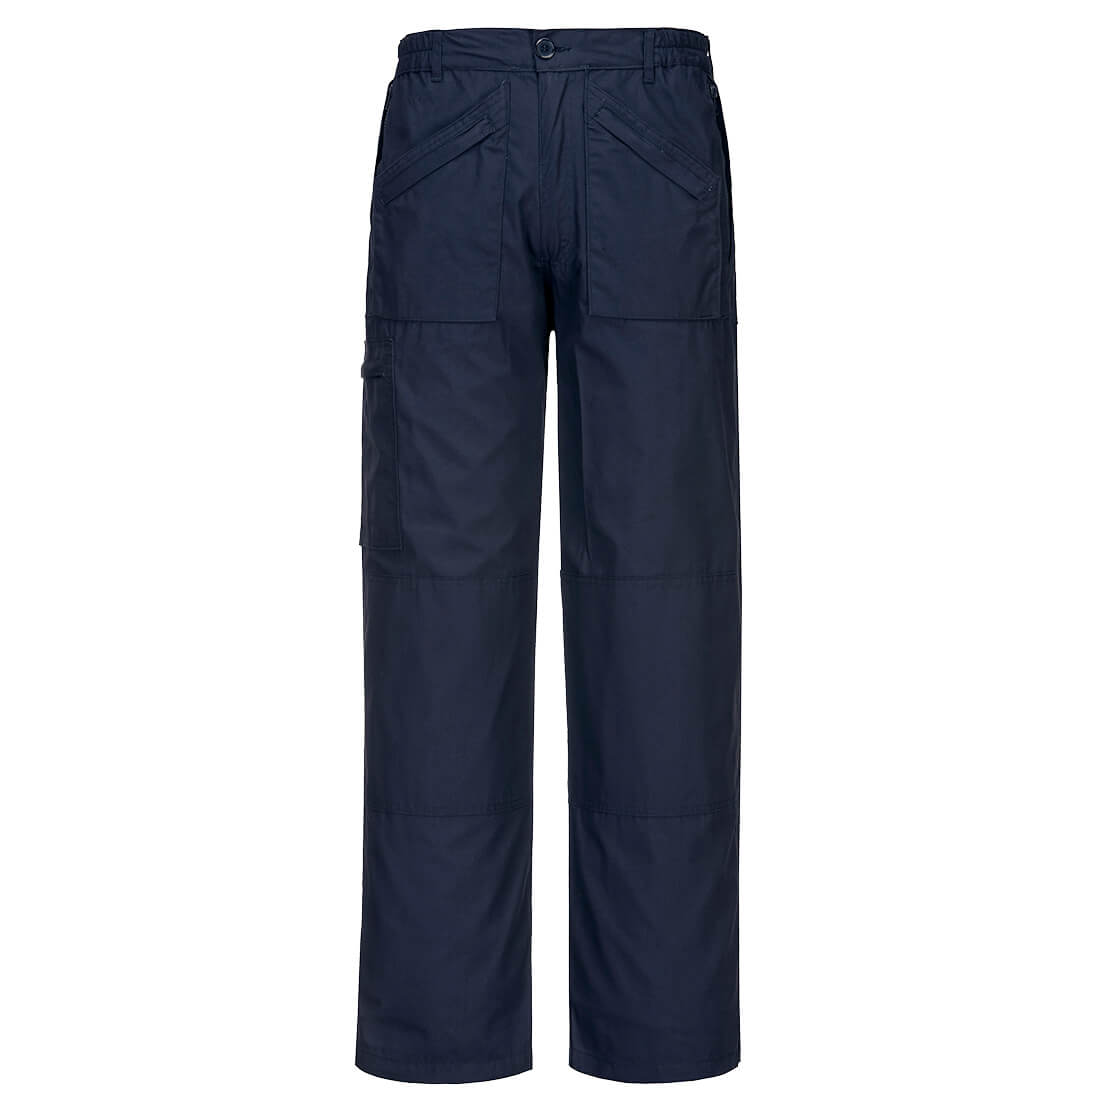 Classic Action Trousers - Texpel Finish  (S787)